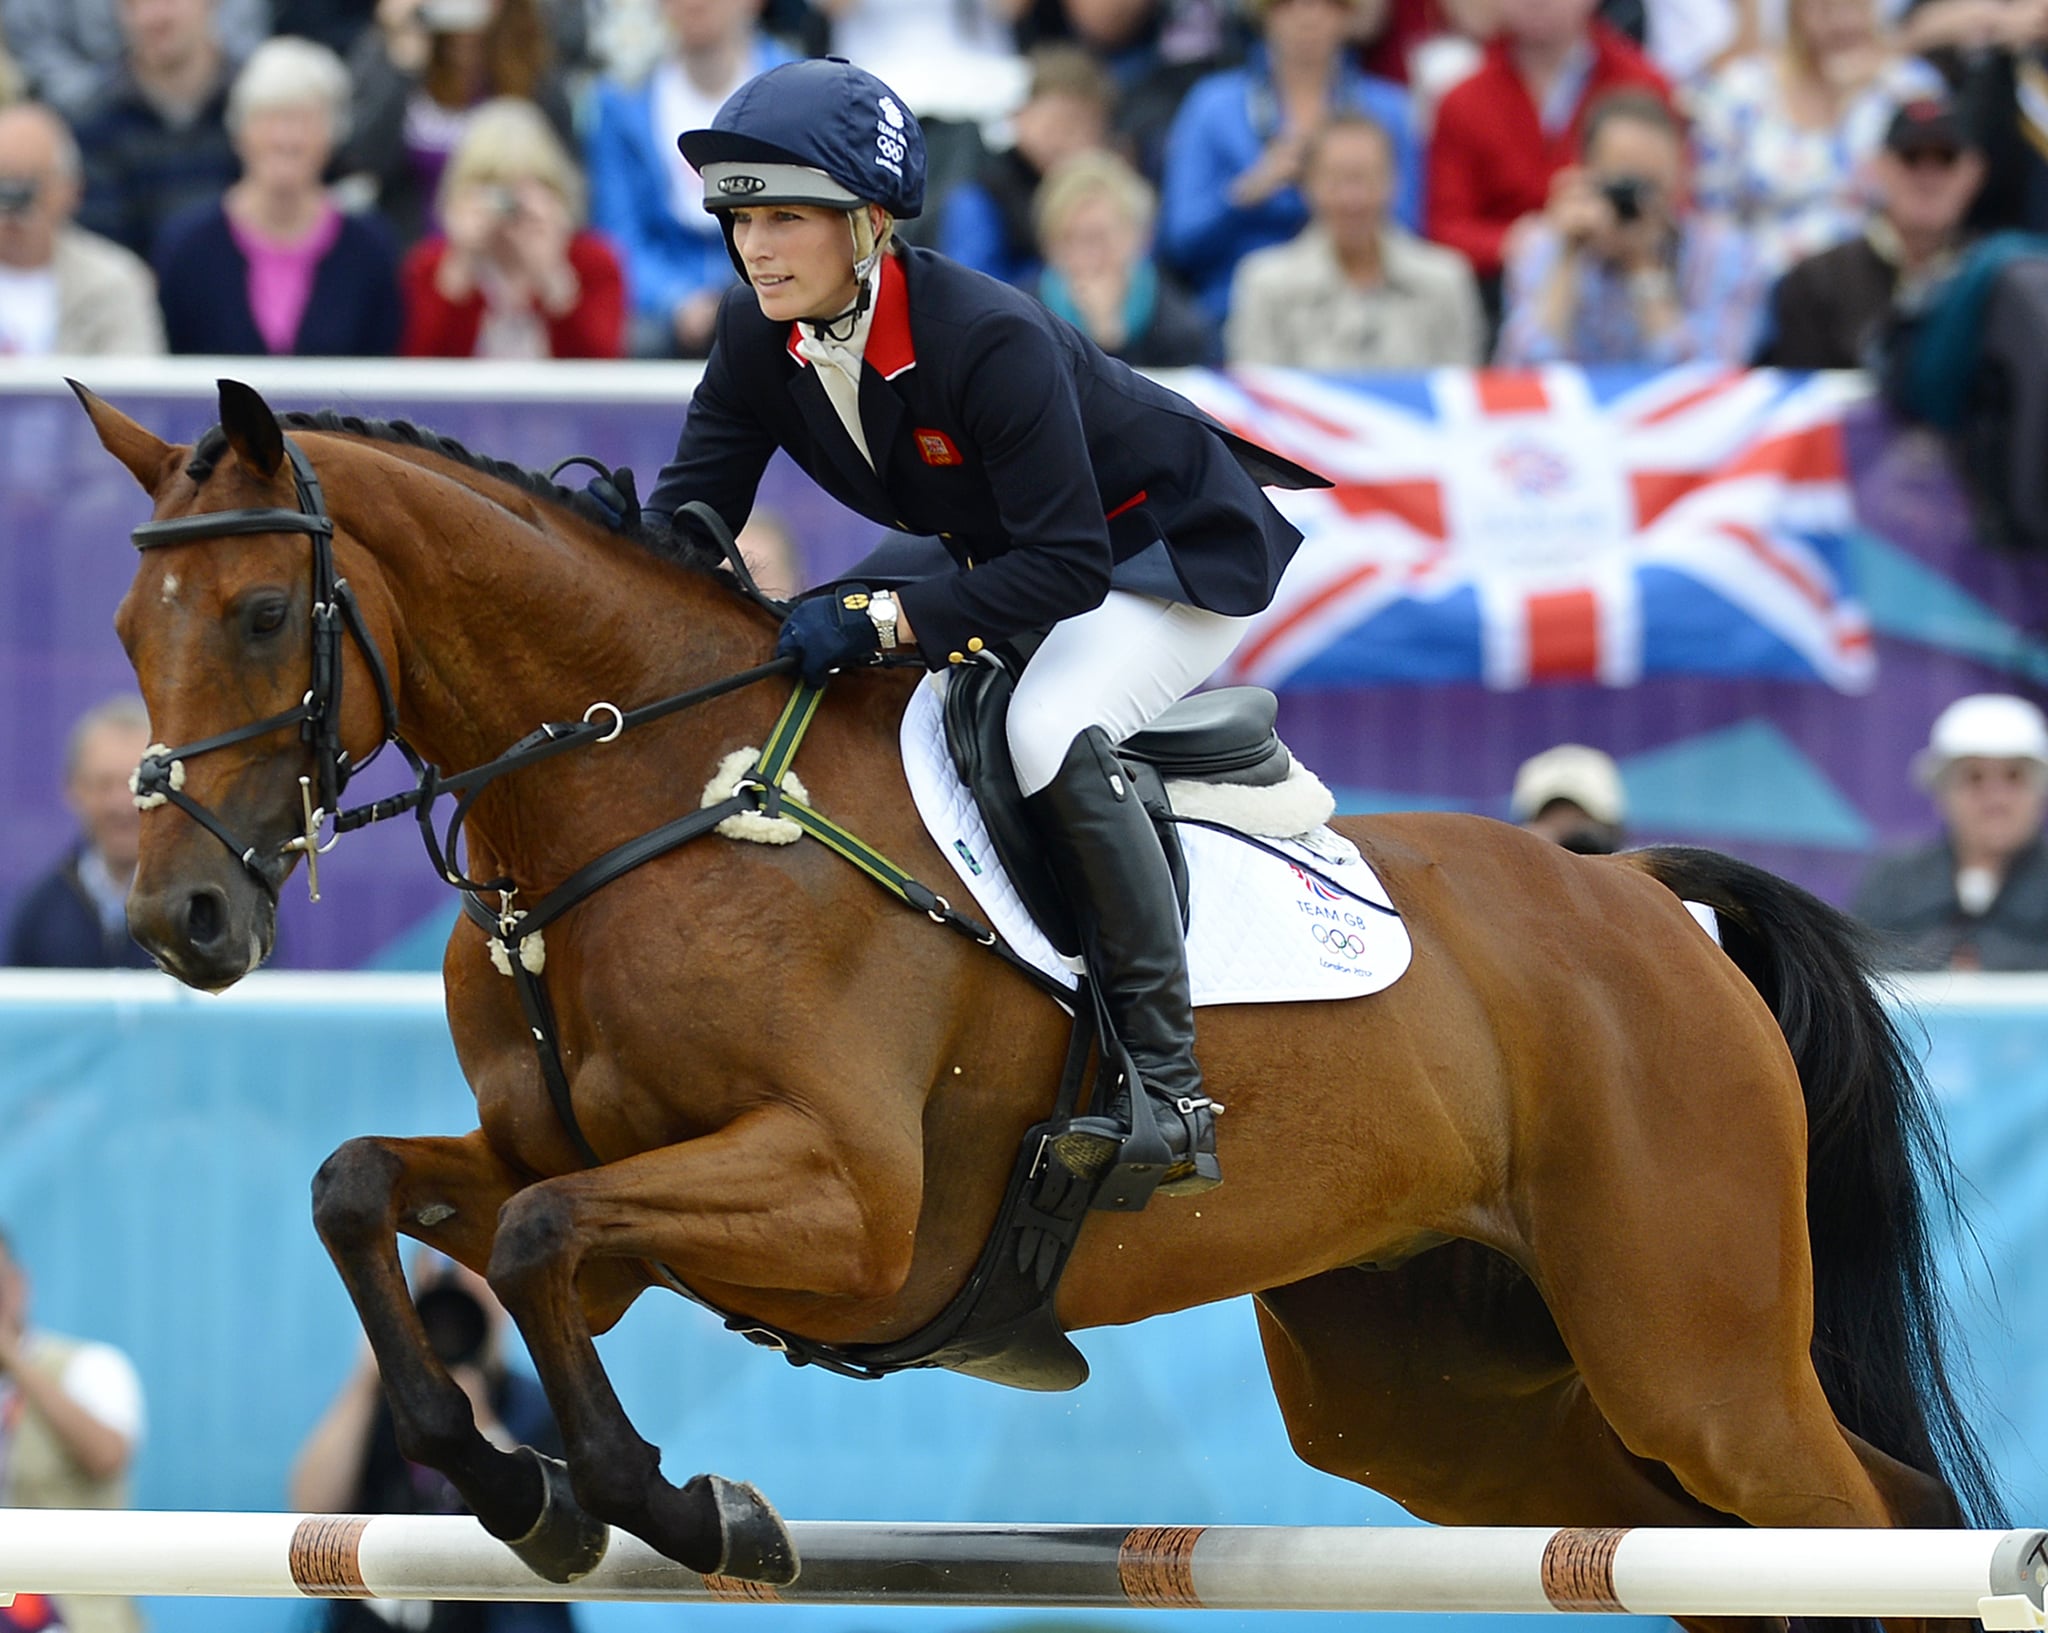 Great Britain's Zara Phillips rides on her horse High Kingdom as they take part in the Jumping Phase of the Eventing competition of the 2012 London Olympics at the Equestrian venue in Greenwich Park, London, on July 31, 2012. AFP PHOTO / ADRIAN DENNIS        (Photo credit should read ADRIAN DENNIS/AFP/GettyImages)